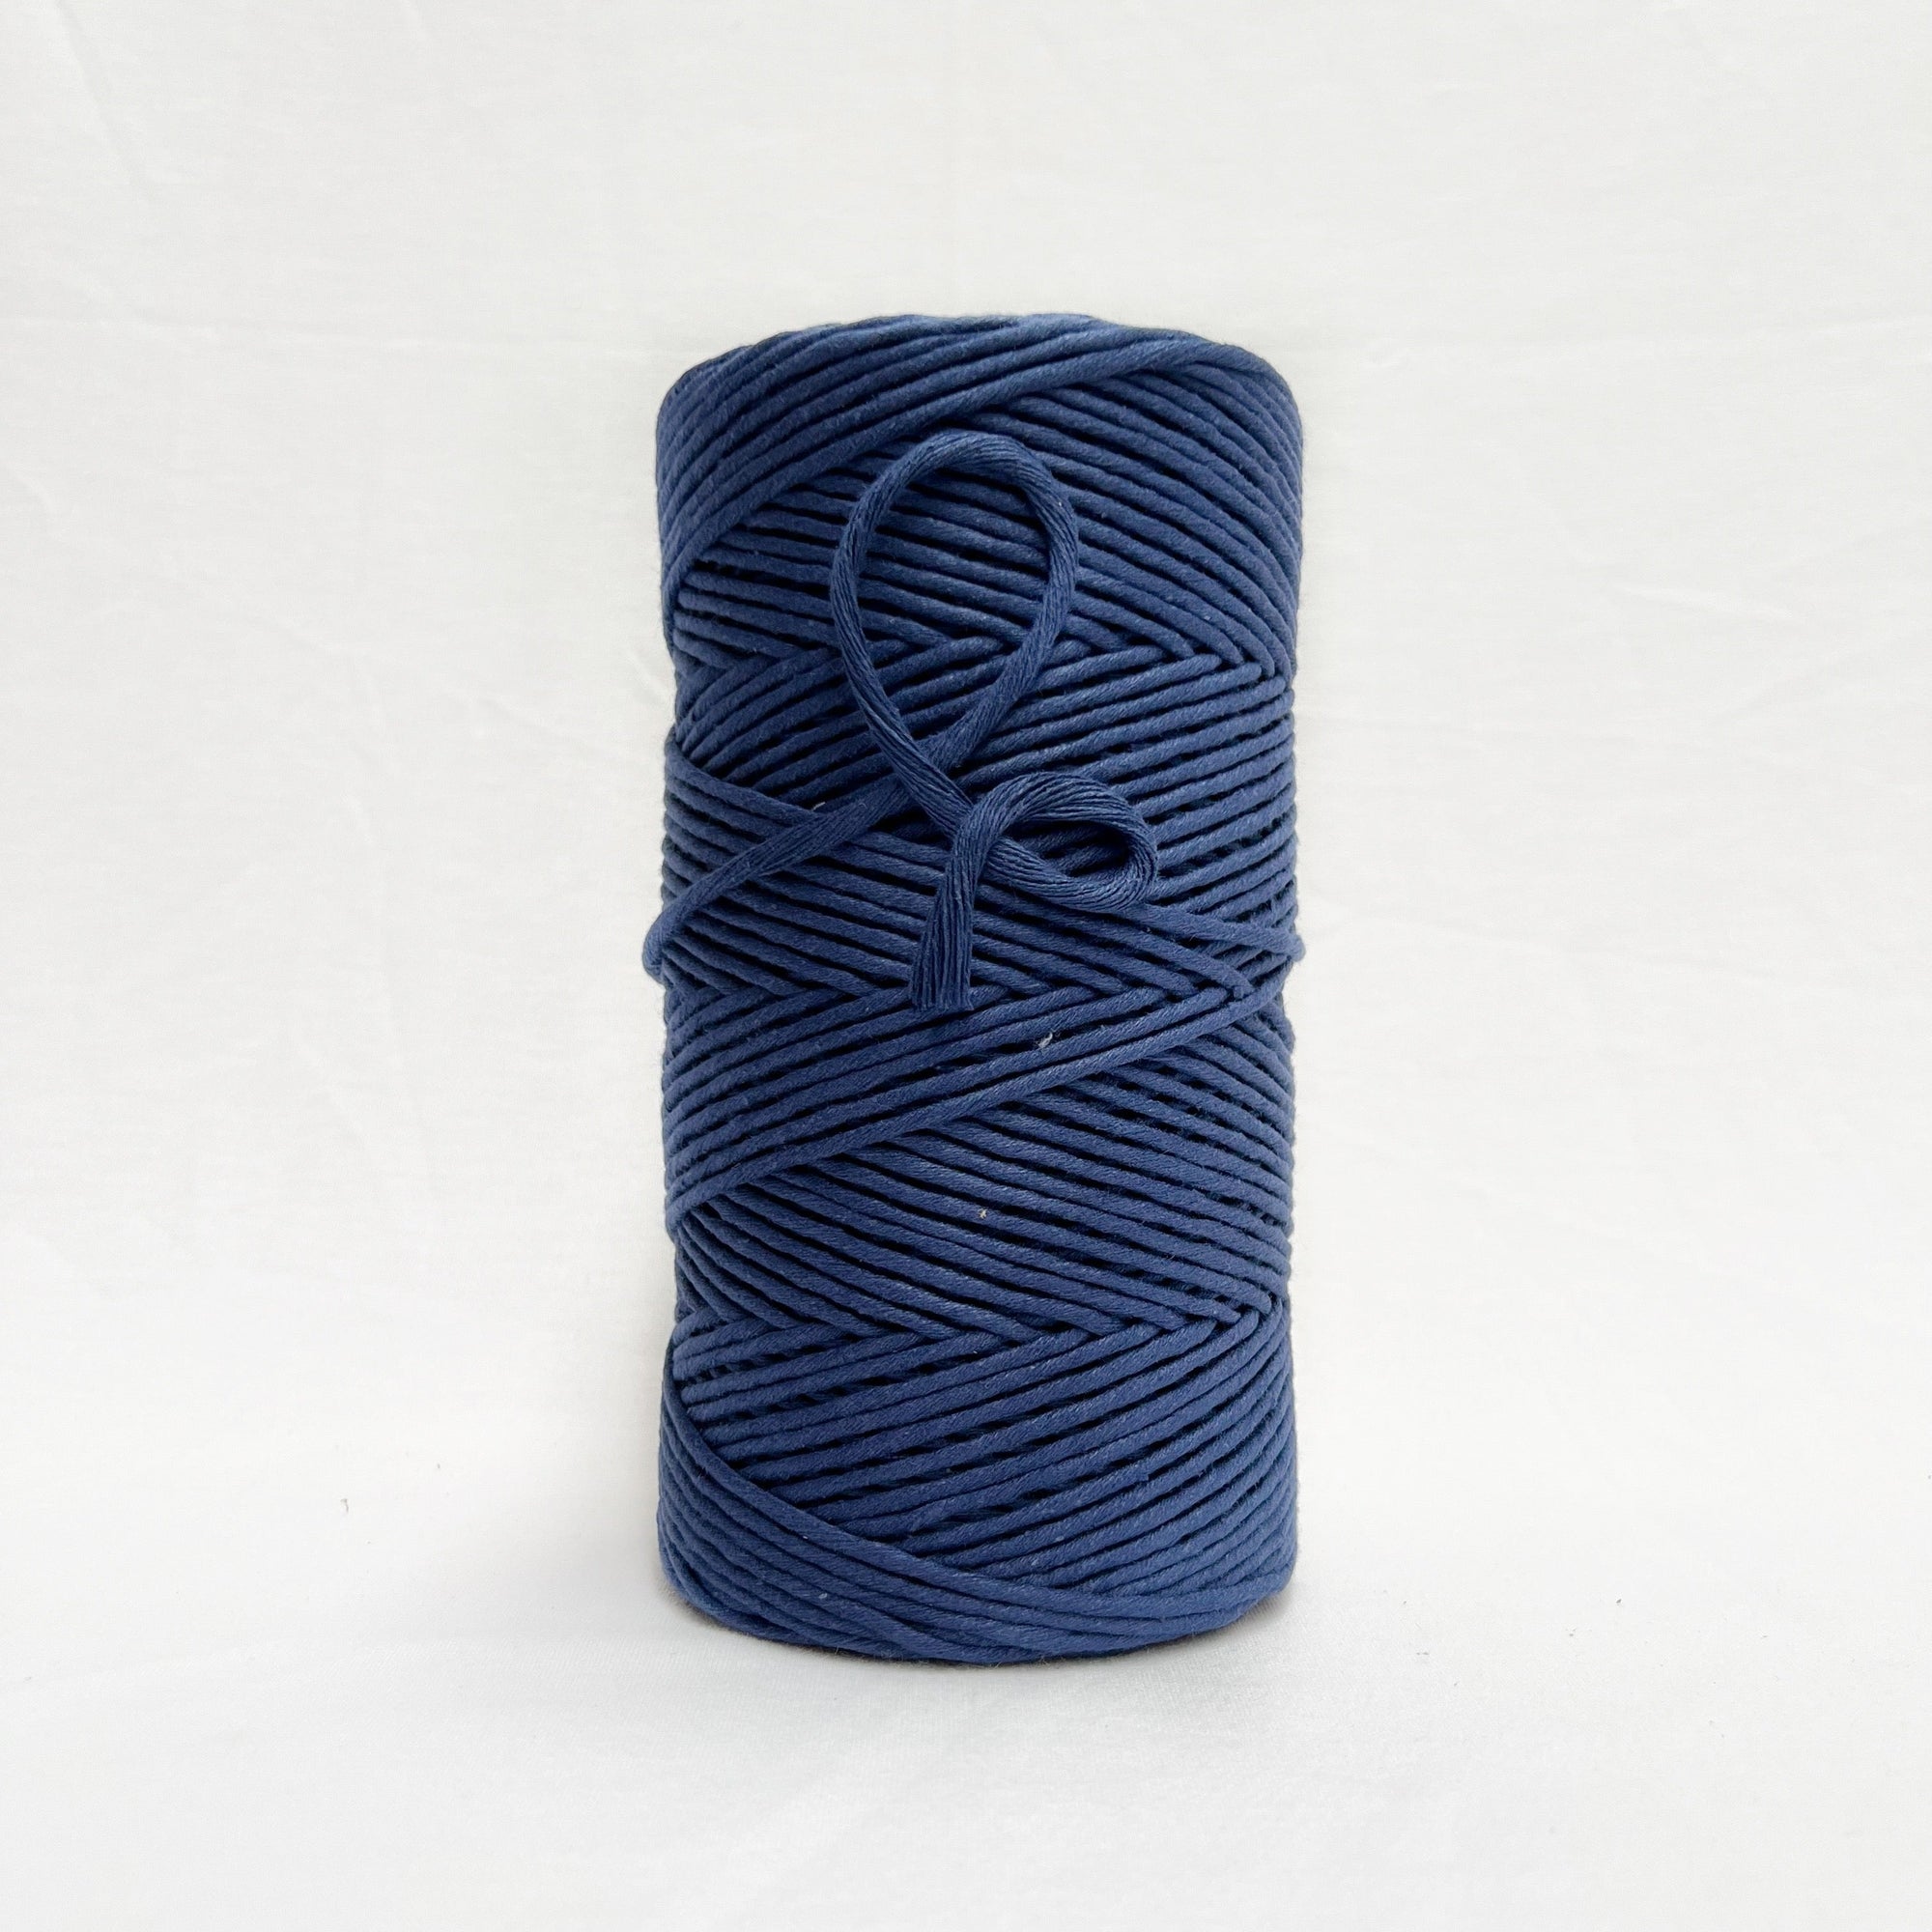 Mary Maker Studio 3mm 1kg Recycled Luxe Macrame String // Blue Depths macrame cotton macrame rope macrame workshop macrame patterns macrame